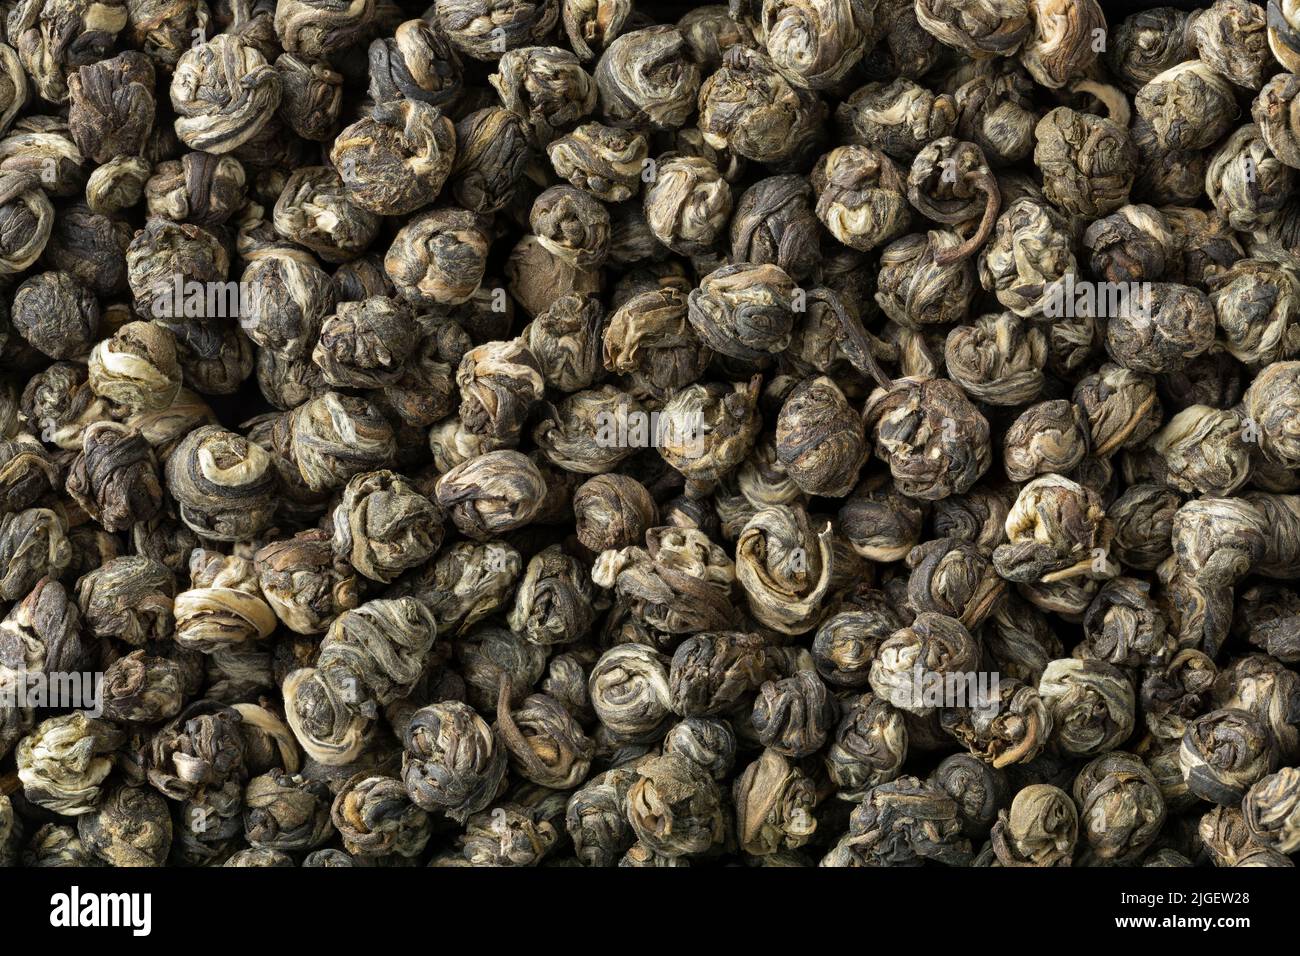 Chinese Jasmine Dragon pearl tea close up full frame as background Stock Photo